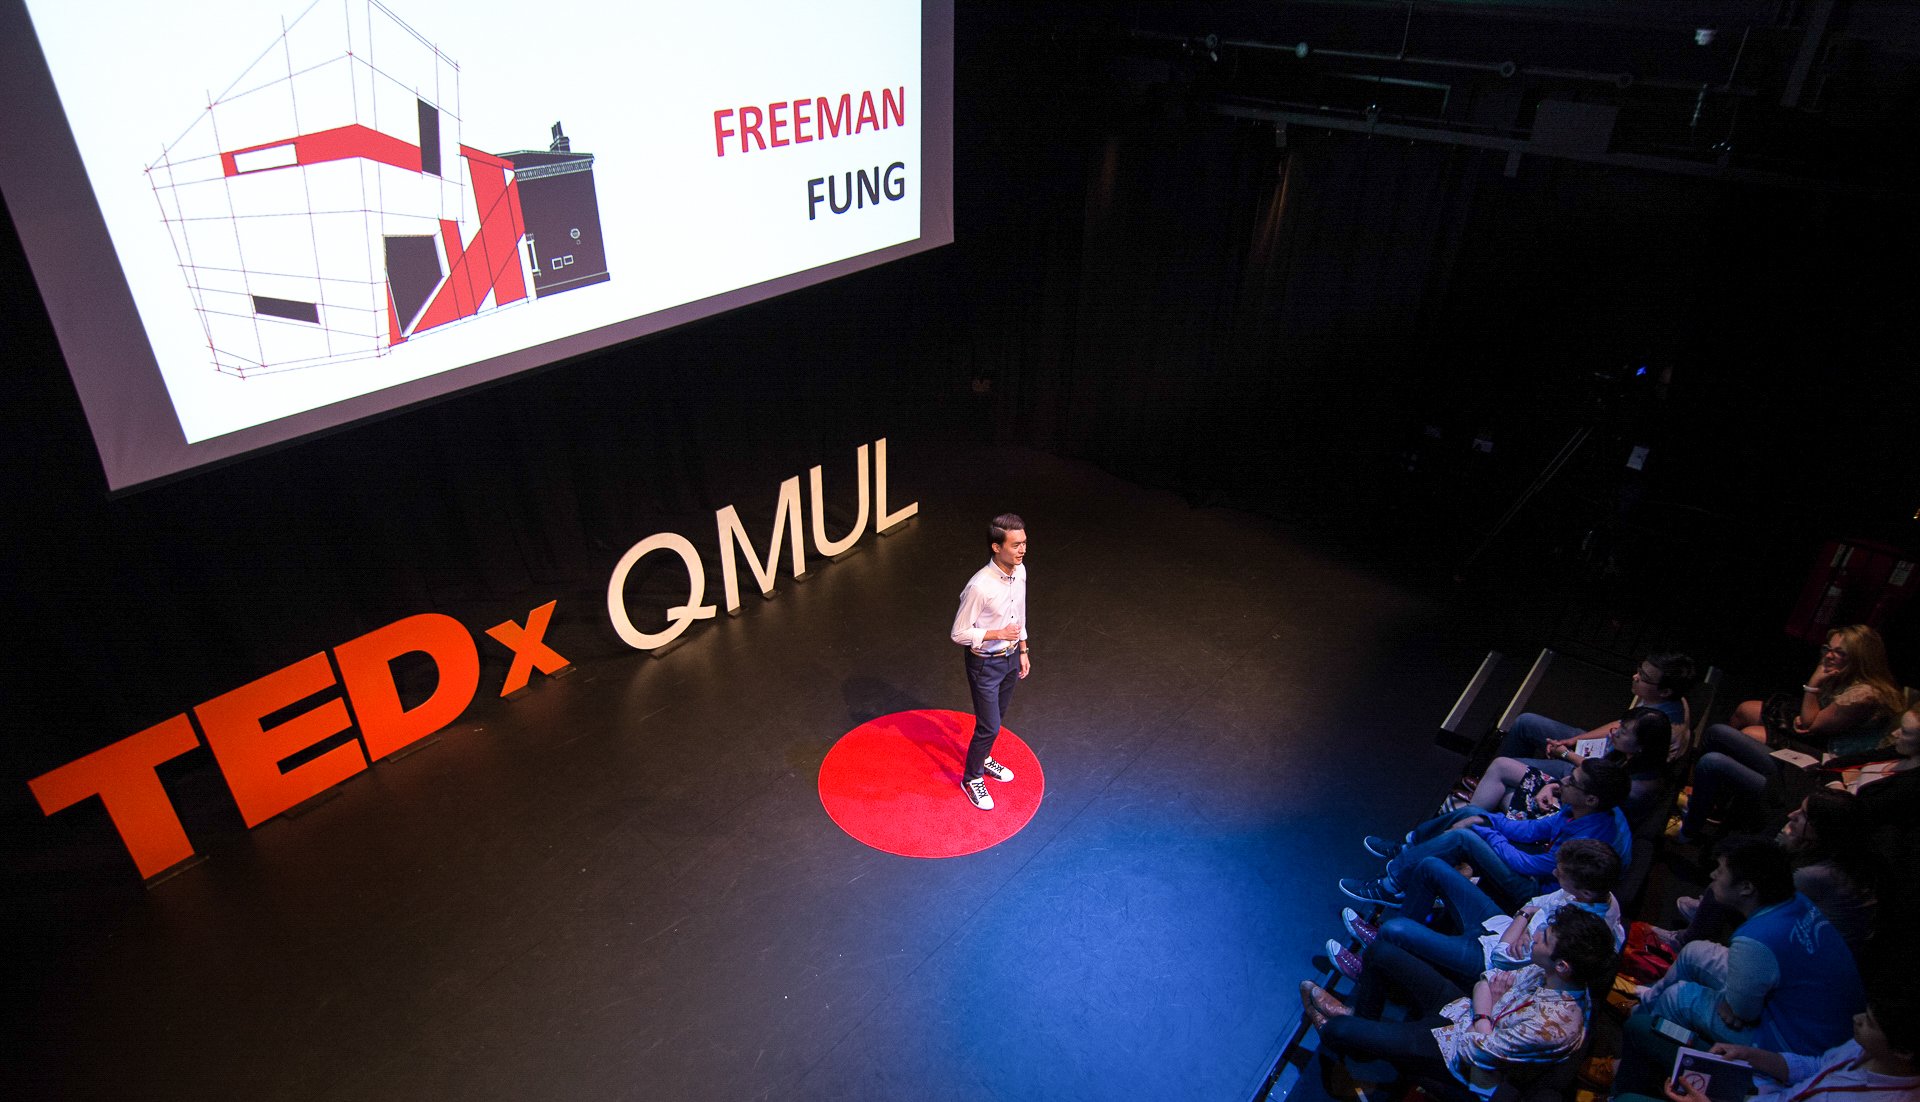 TED-freeman-fung-qmul-global-citizenship-travel-culture-talk-stage-speaking.jpg